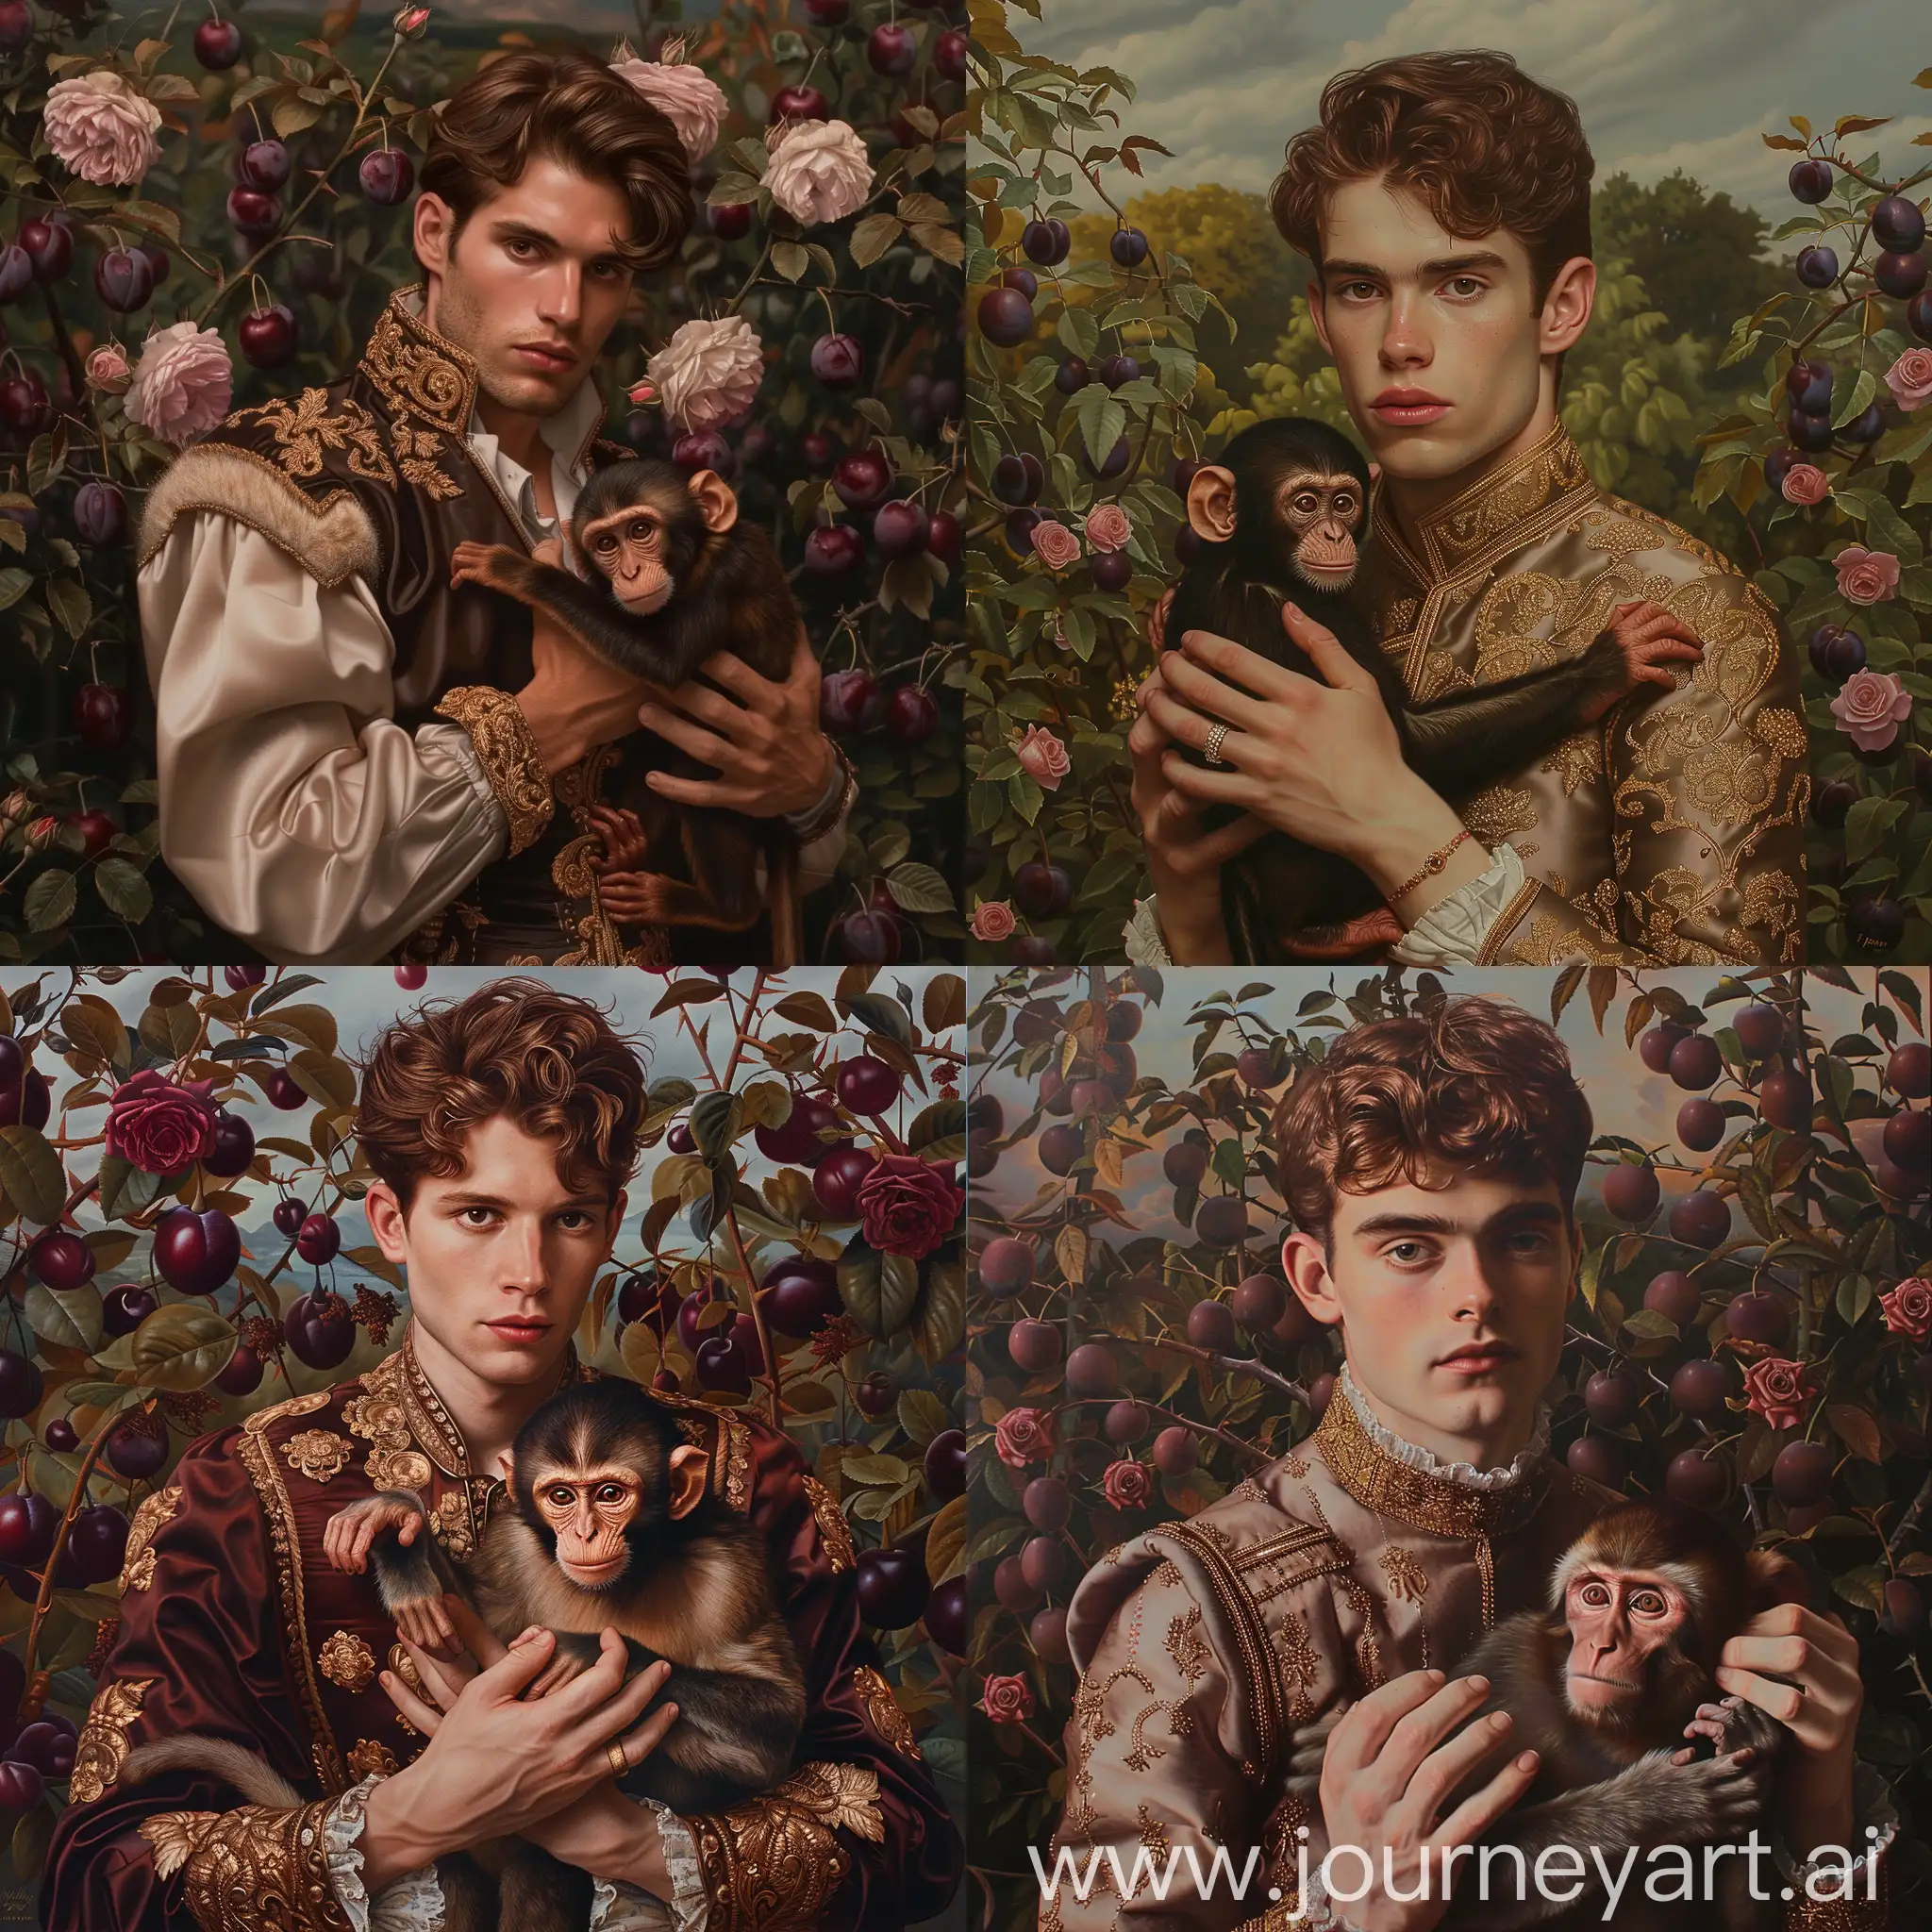 handsome guy with brown hair, European type, Baroque style, with a monkey in his hands against a background of plum trees and luxurious bushes with roses, hyper-realism